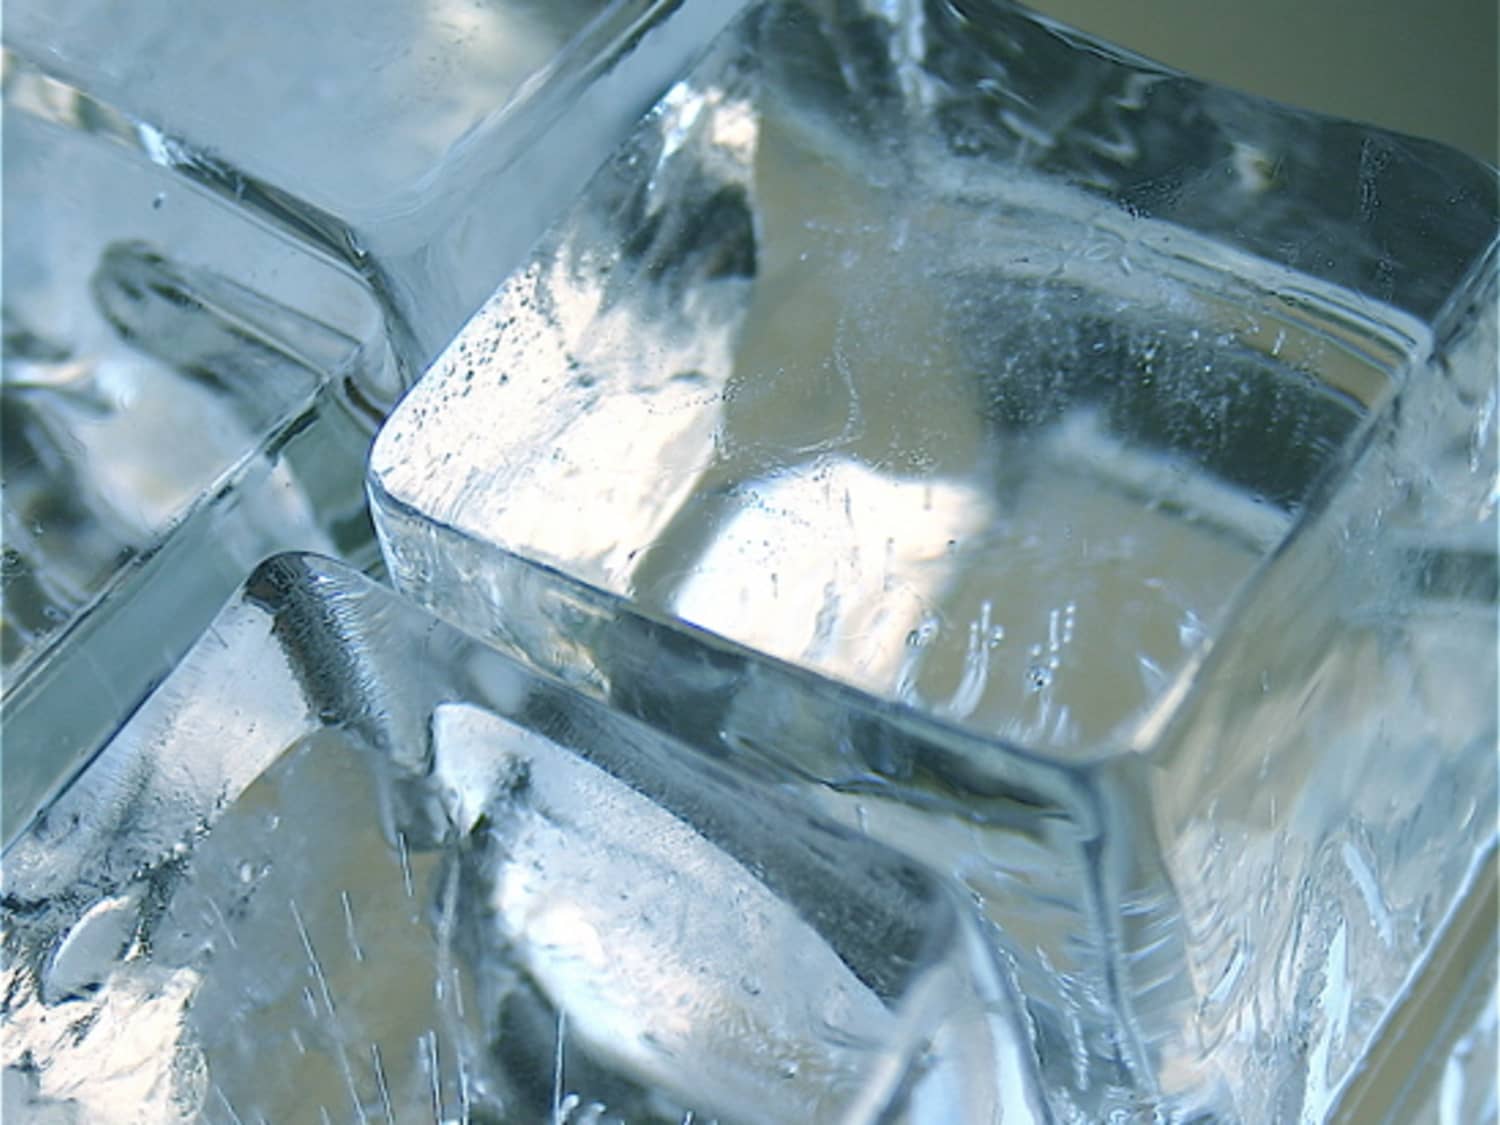 How long does an ice cube last in the freezer? - Quora